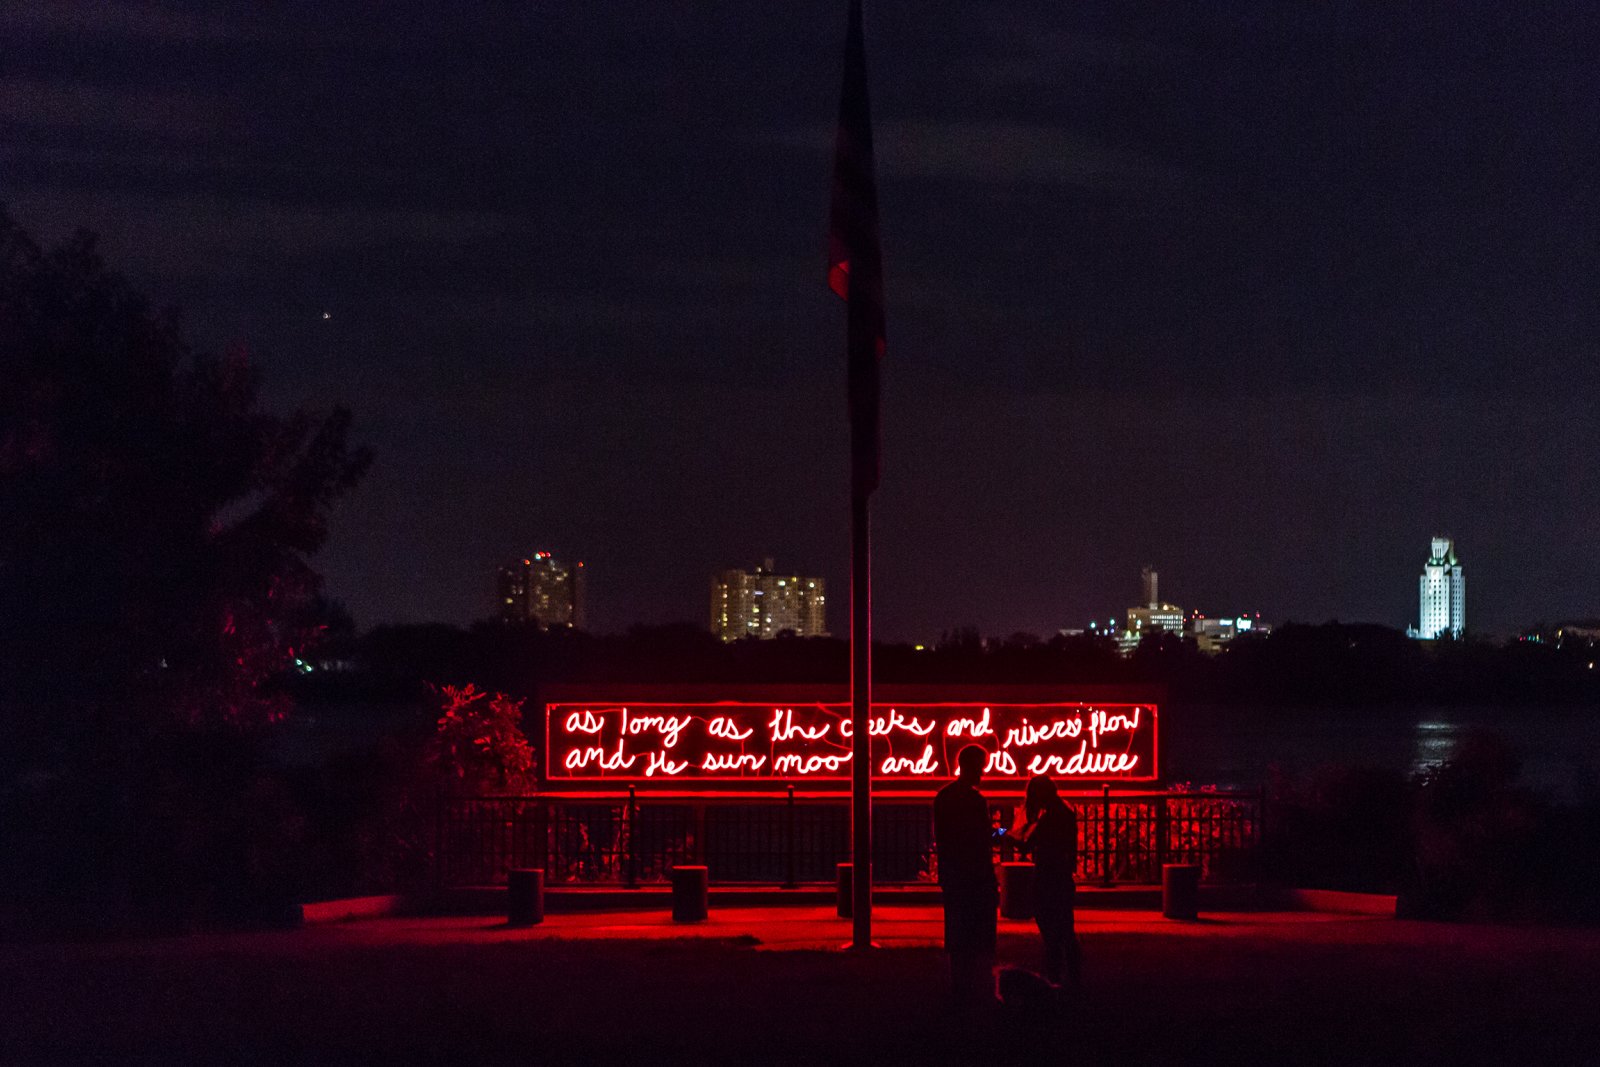 Duane Linklater, In Perpetuity, 2017, neon, transformers, aluminum, polycarbonate, and handwritten text by Sassa Linklater, 59 x 360 x 9 in. (150 x 914 x 23 cm). Installation view, Monument Lab: A Public Art and History Project, Mural Arts Philadelphia at Penn Treaty Park, Philadelphia, 2017